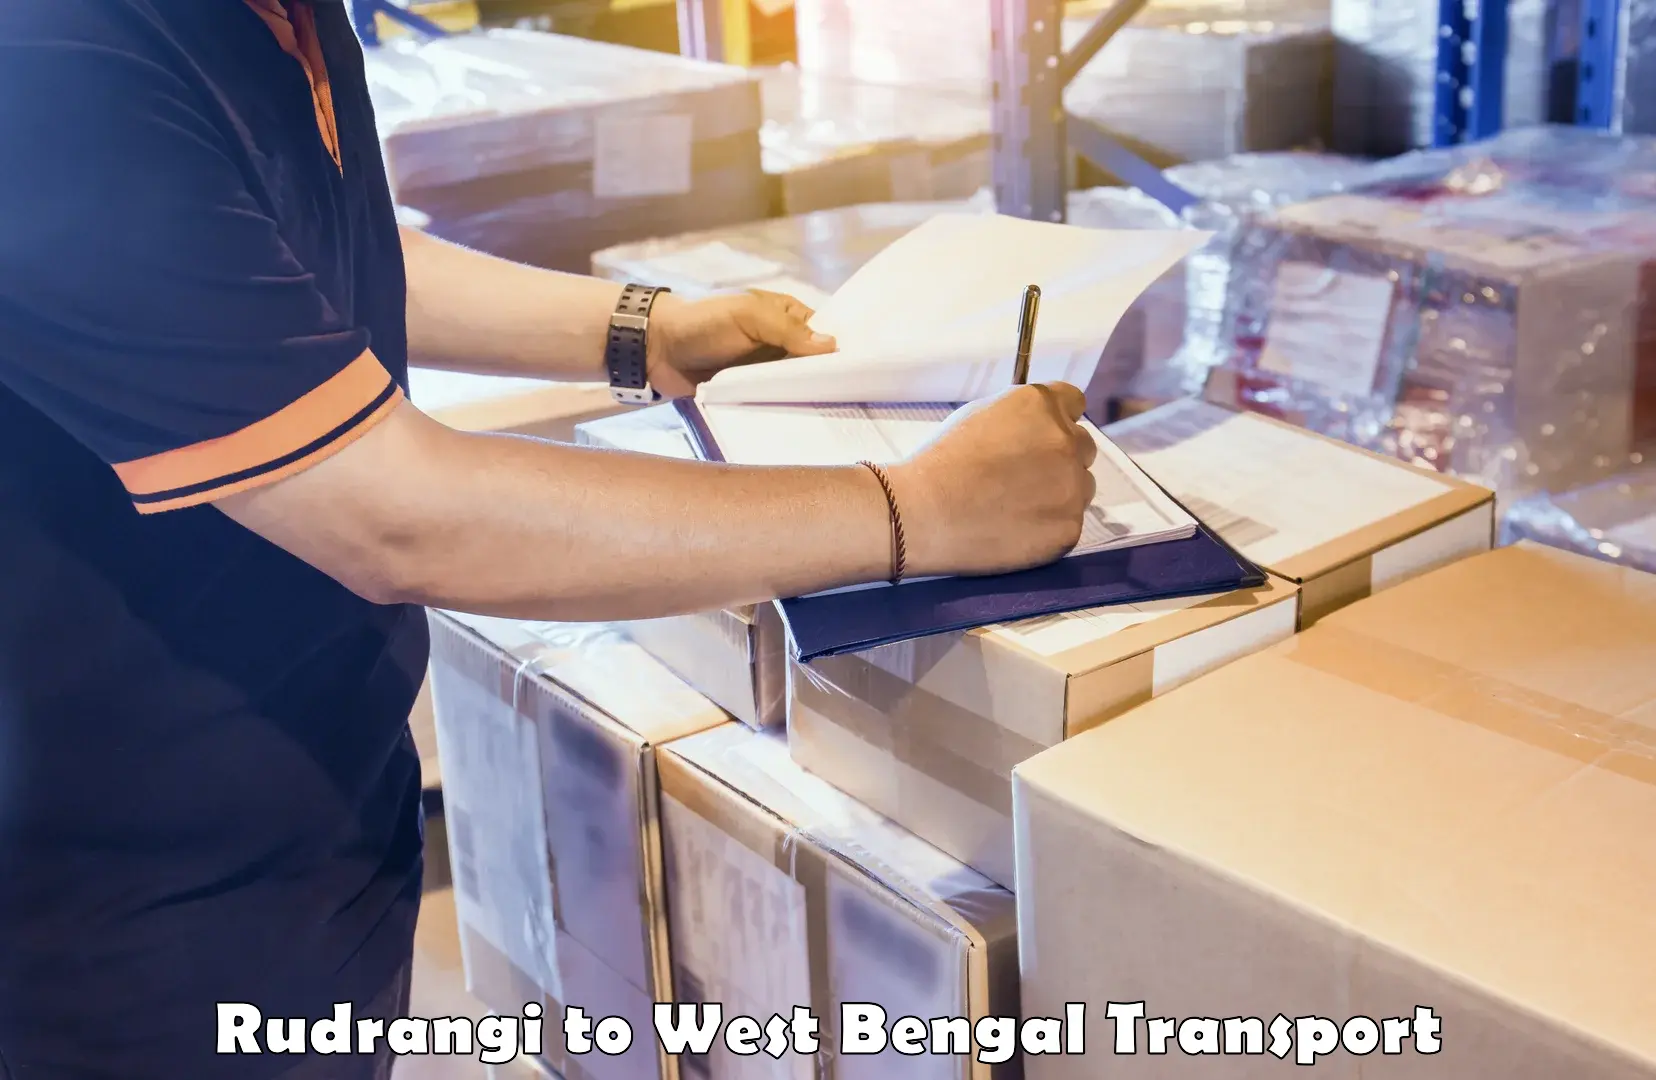 Commercial transport service Rudrangi to West Bengal